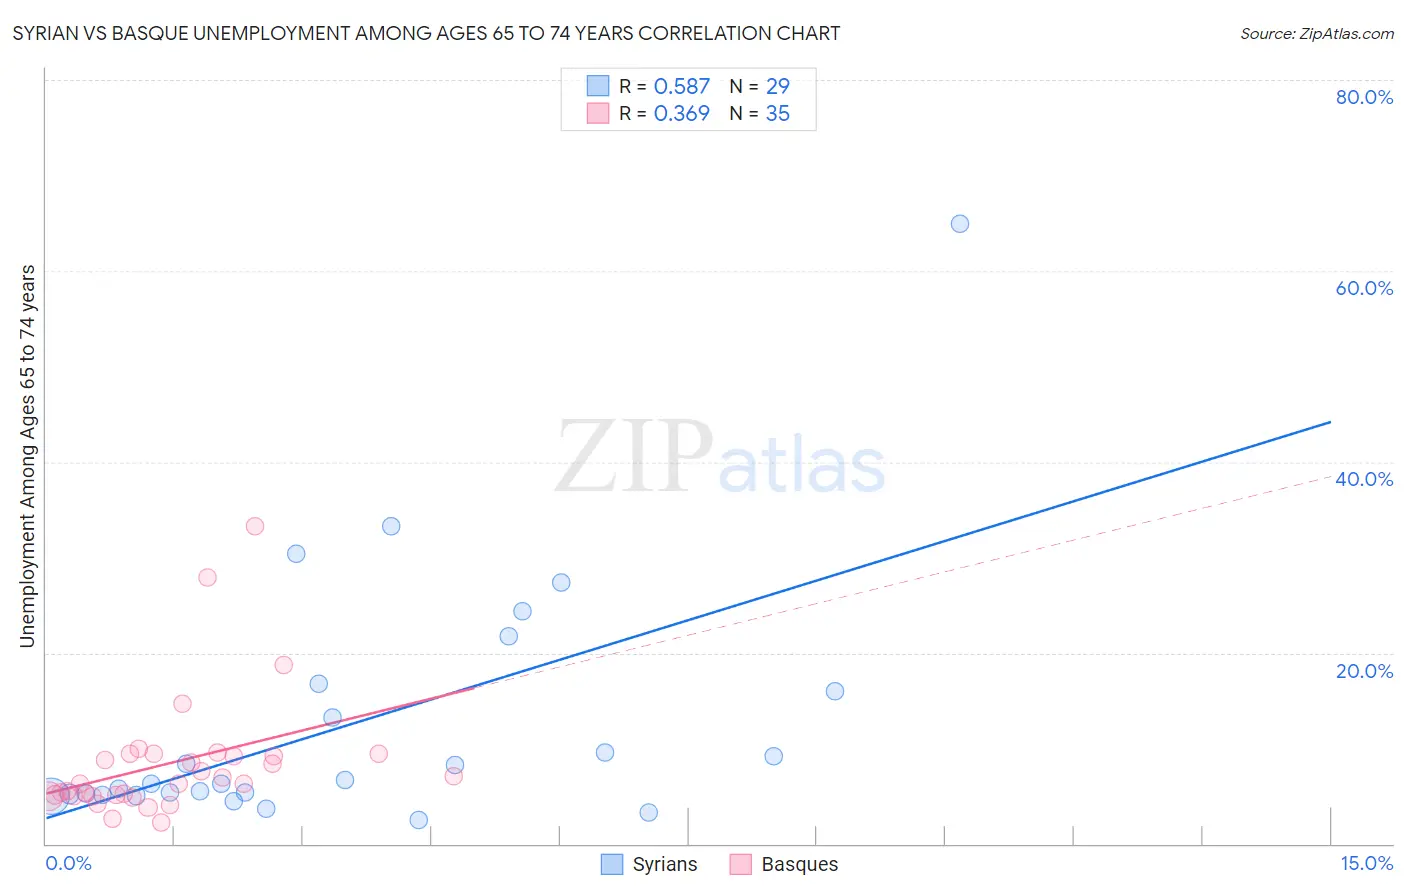 Syrian vs Basque Unemployment Among Ages 65 to 74 years